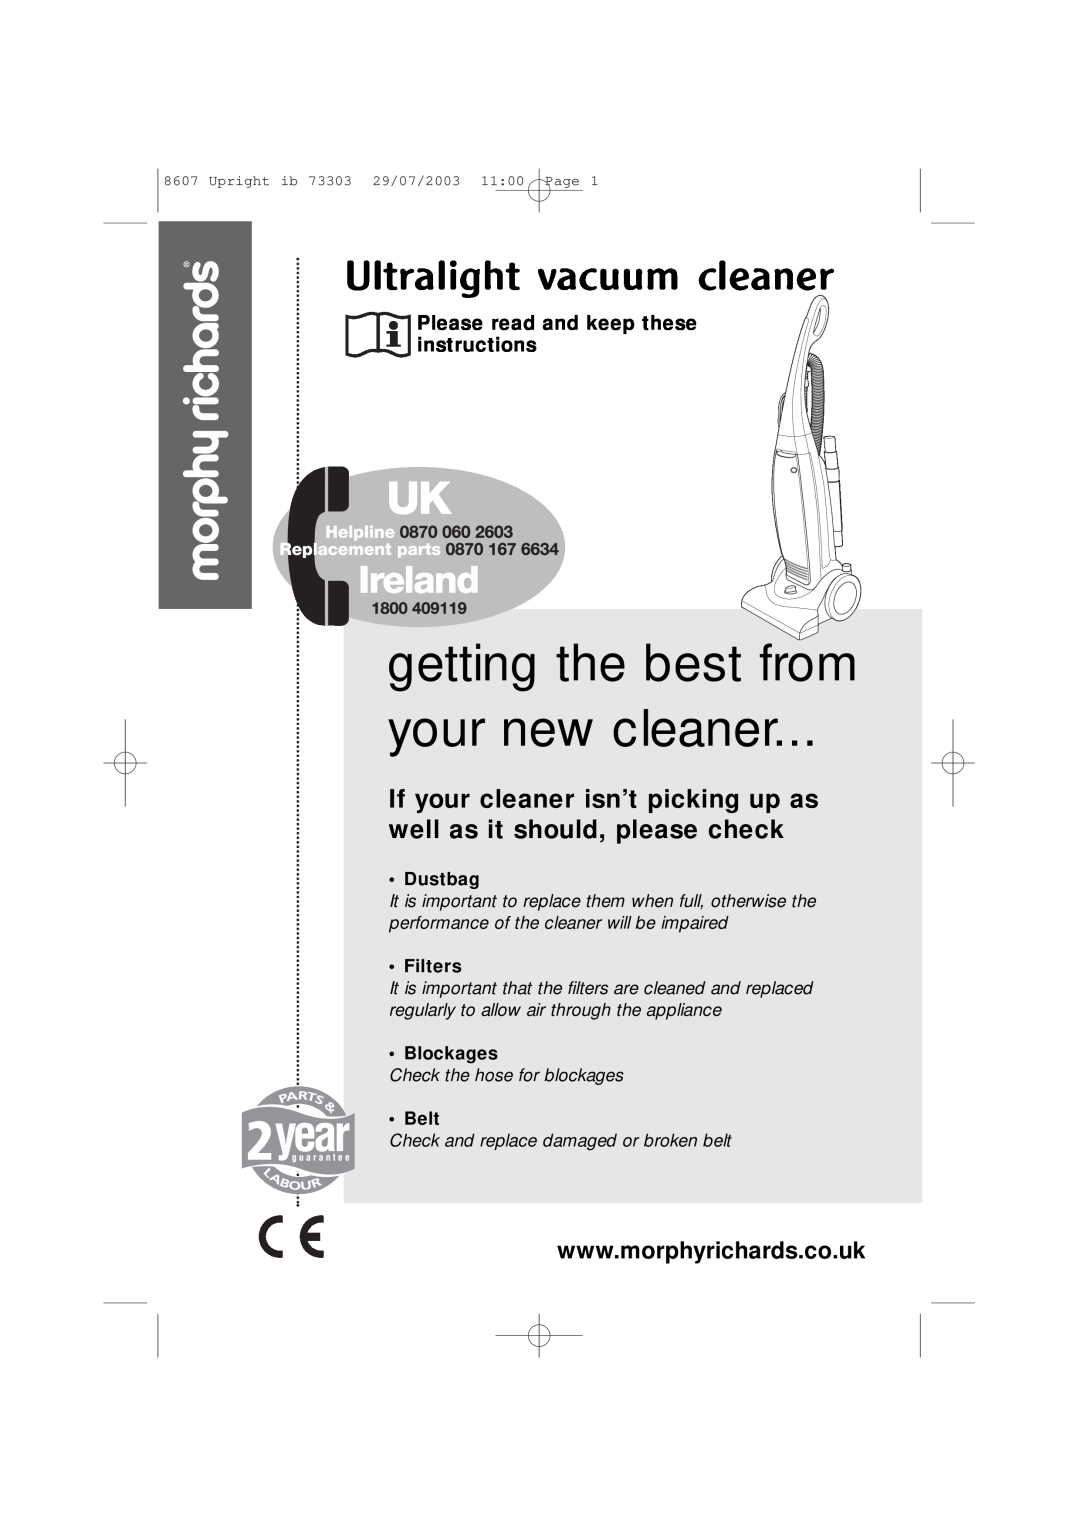 Morphy Richards Ultralight vacuum cleaner manual getting the best from your new cleaner, Dustbag, • Filters, Blockages 